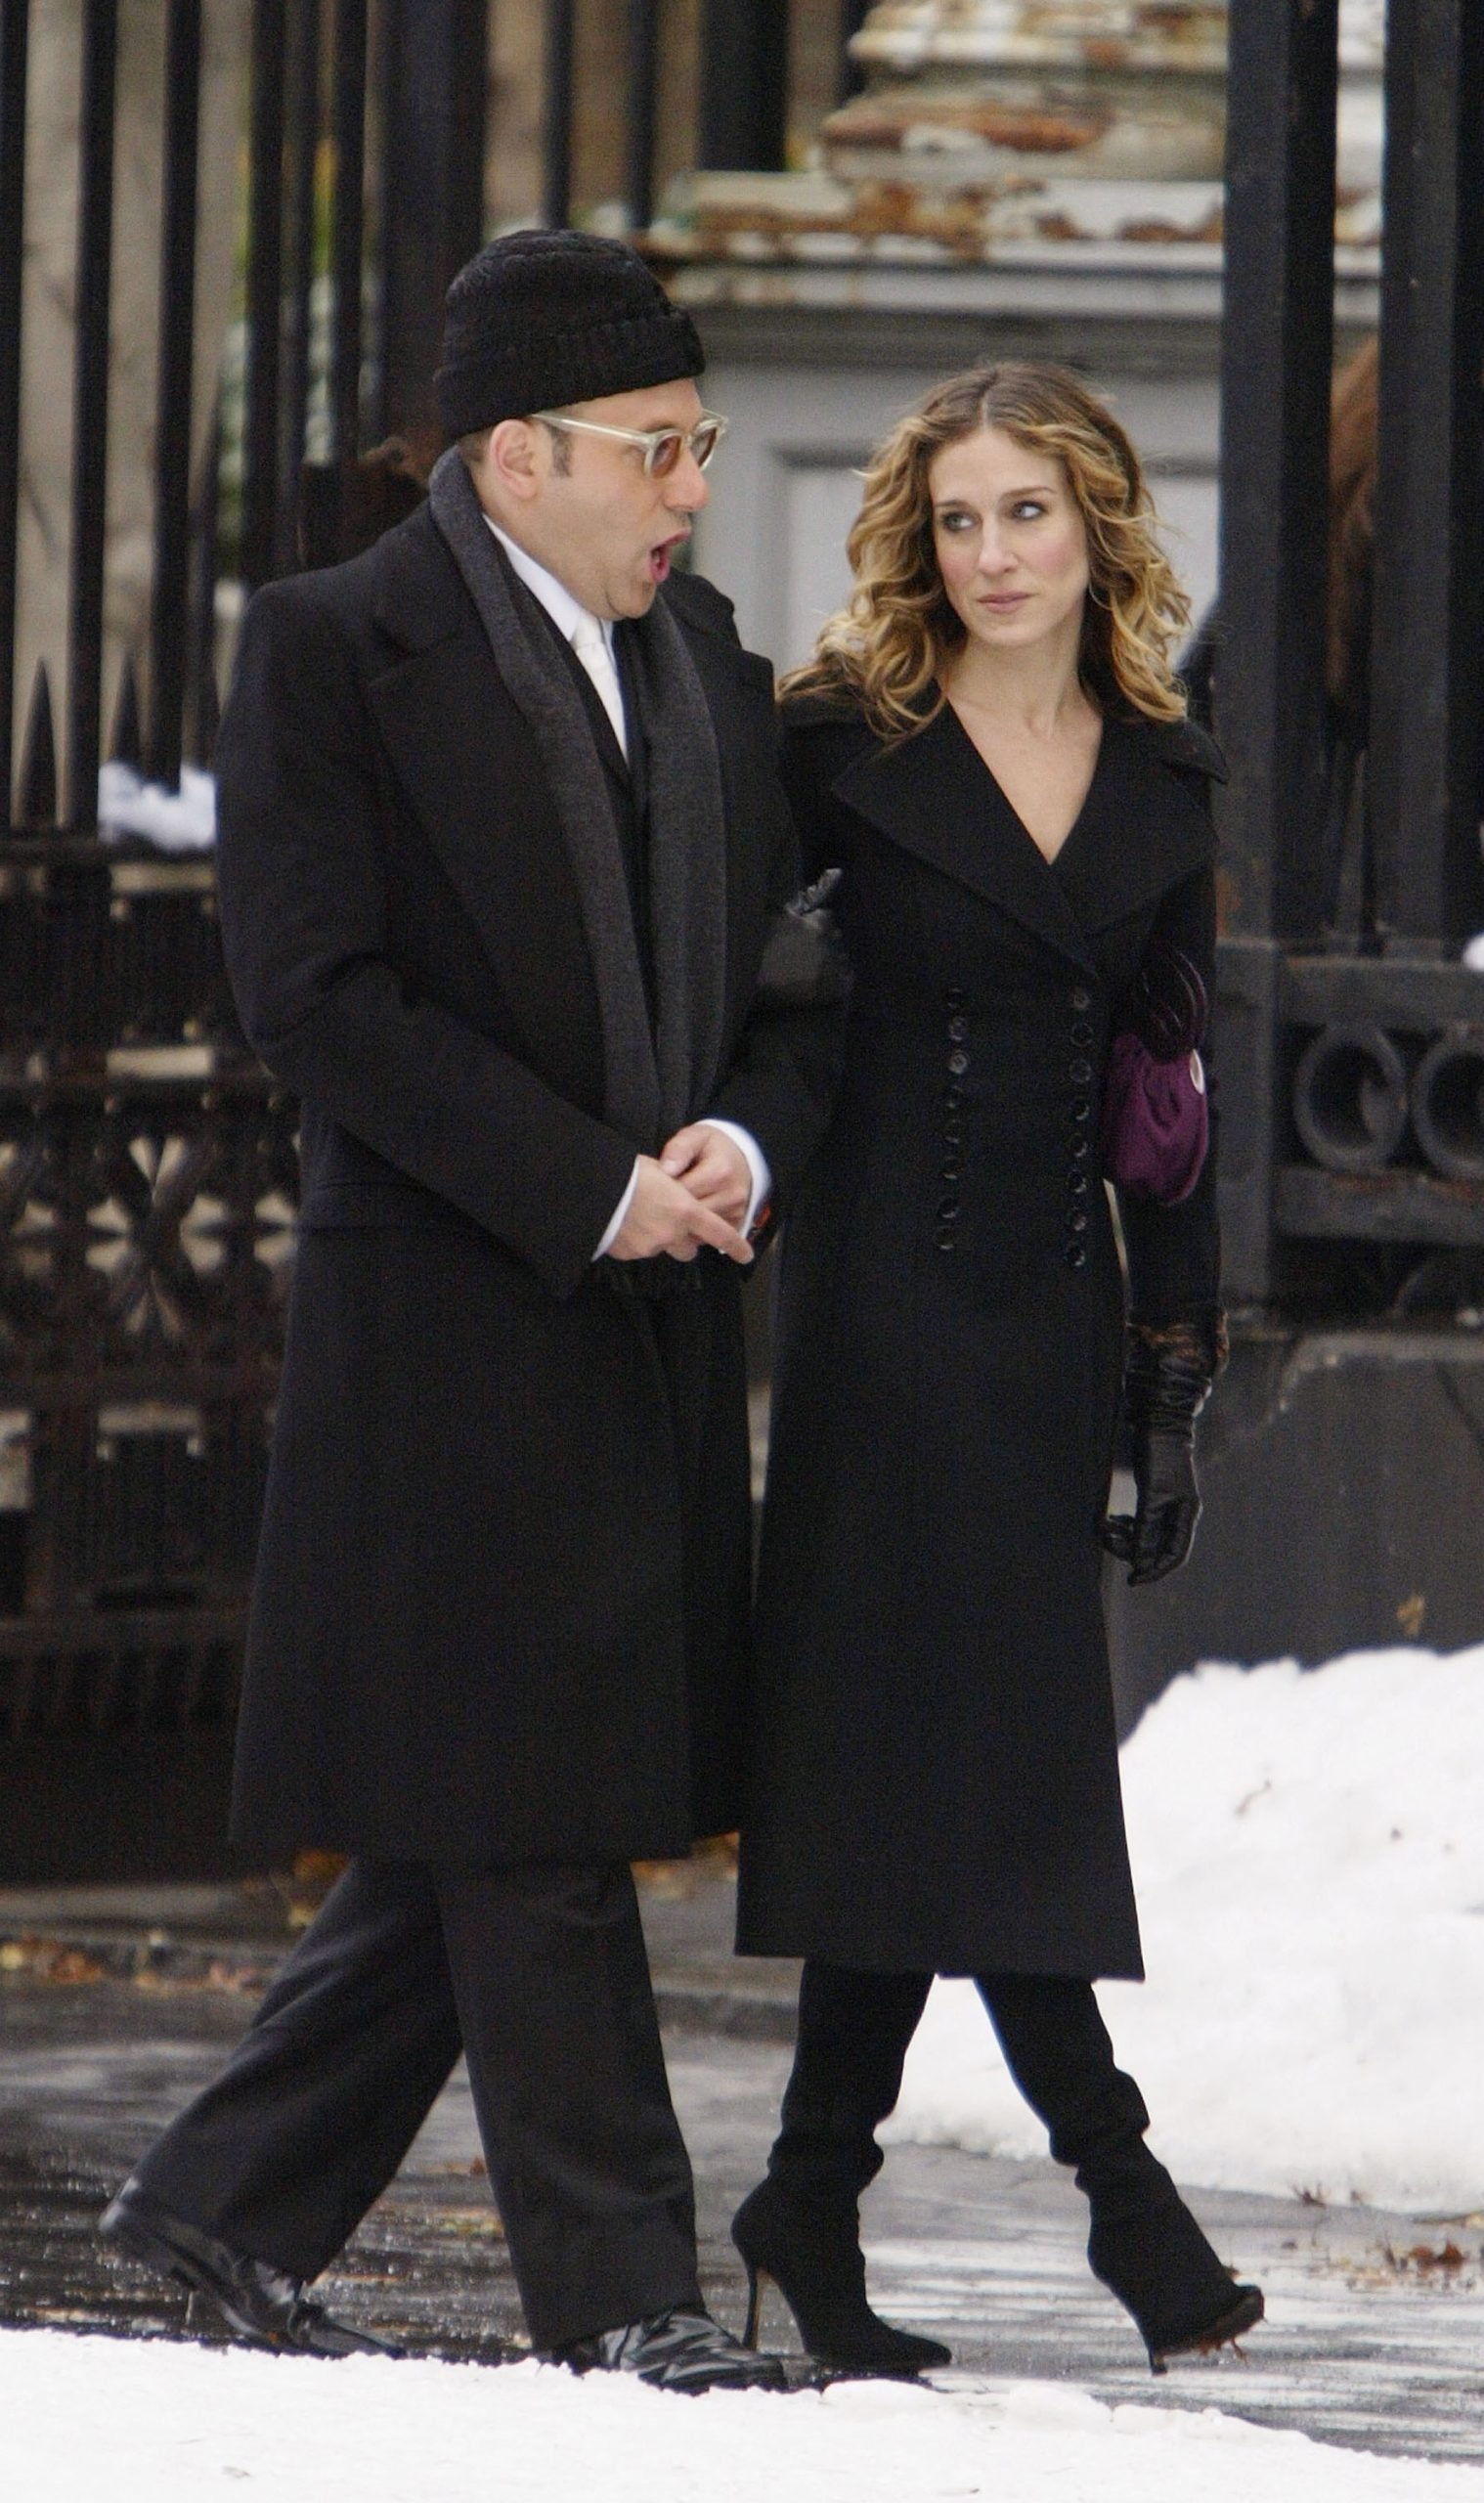 Willie Garson as Stanford Blatch and Sarah Jessica Parker as Carrie Bradshaw walk down a Manhattan street during the filming of season 6 of 'Sex and the City' in 2004